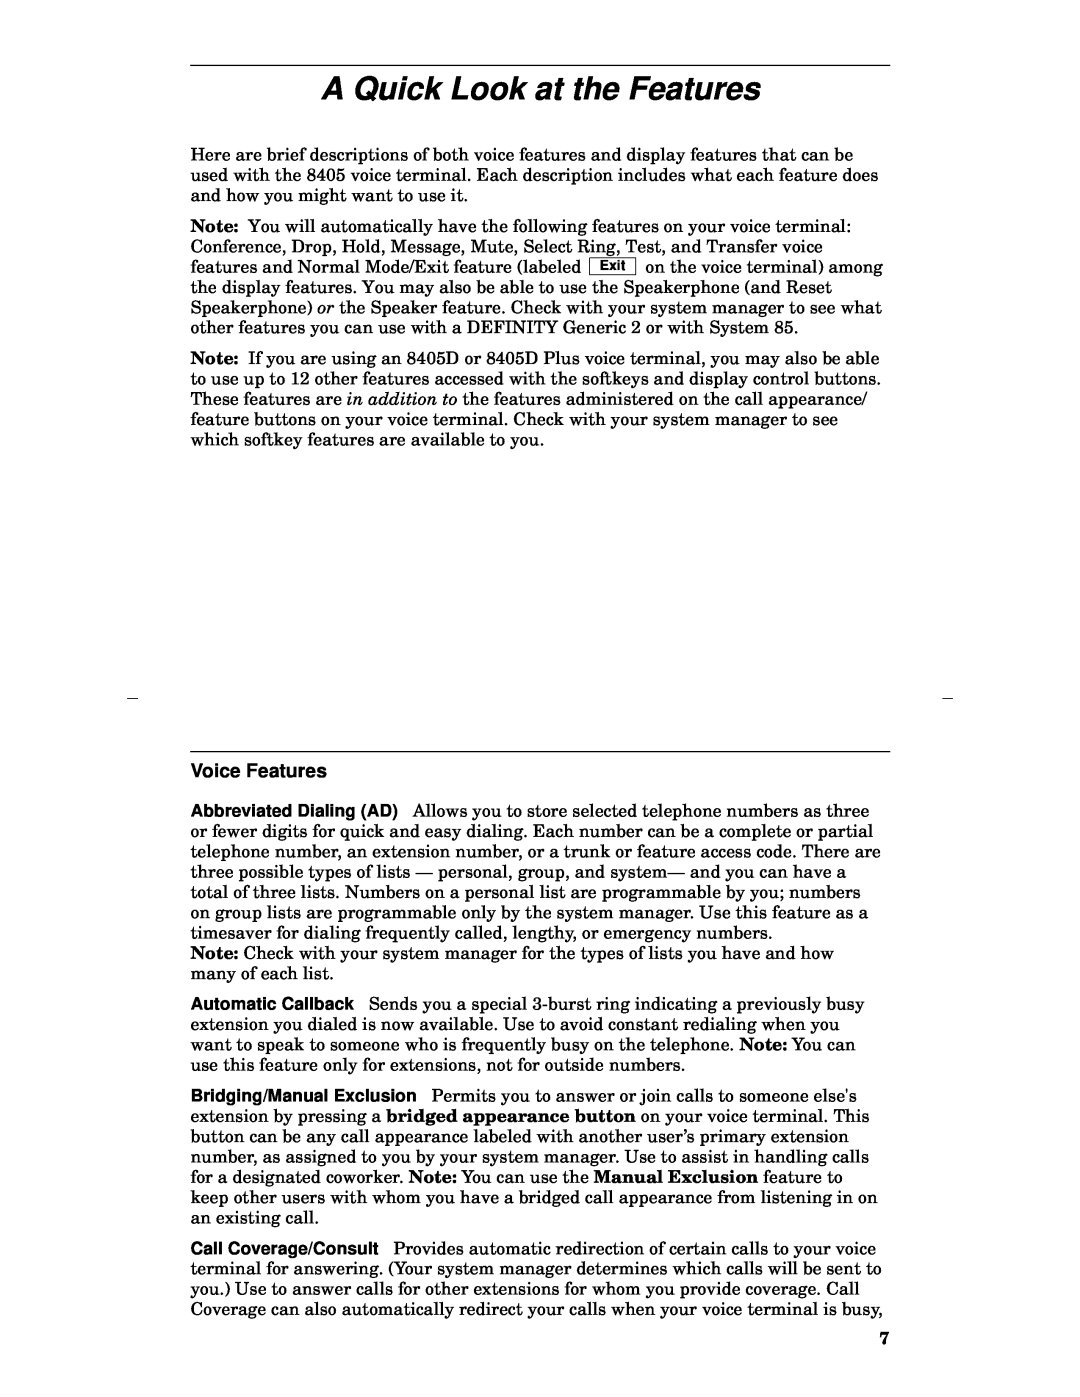 Lucent Technologies 8405 manual A Quick Look at the Features, Voice Features 